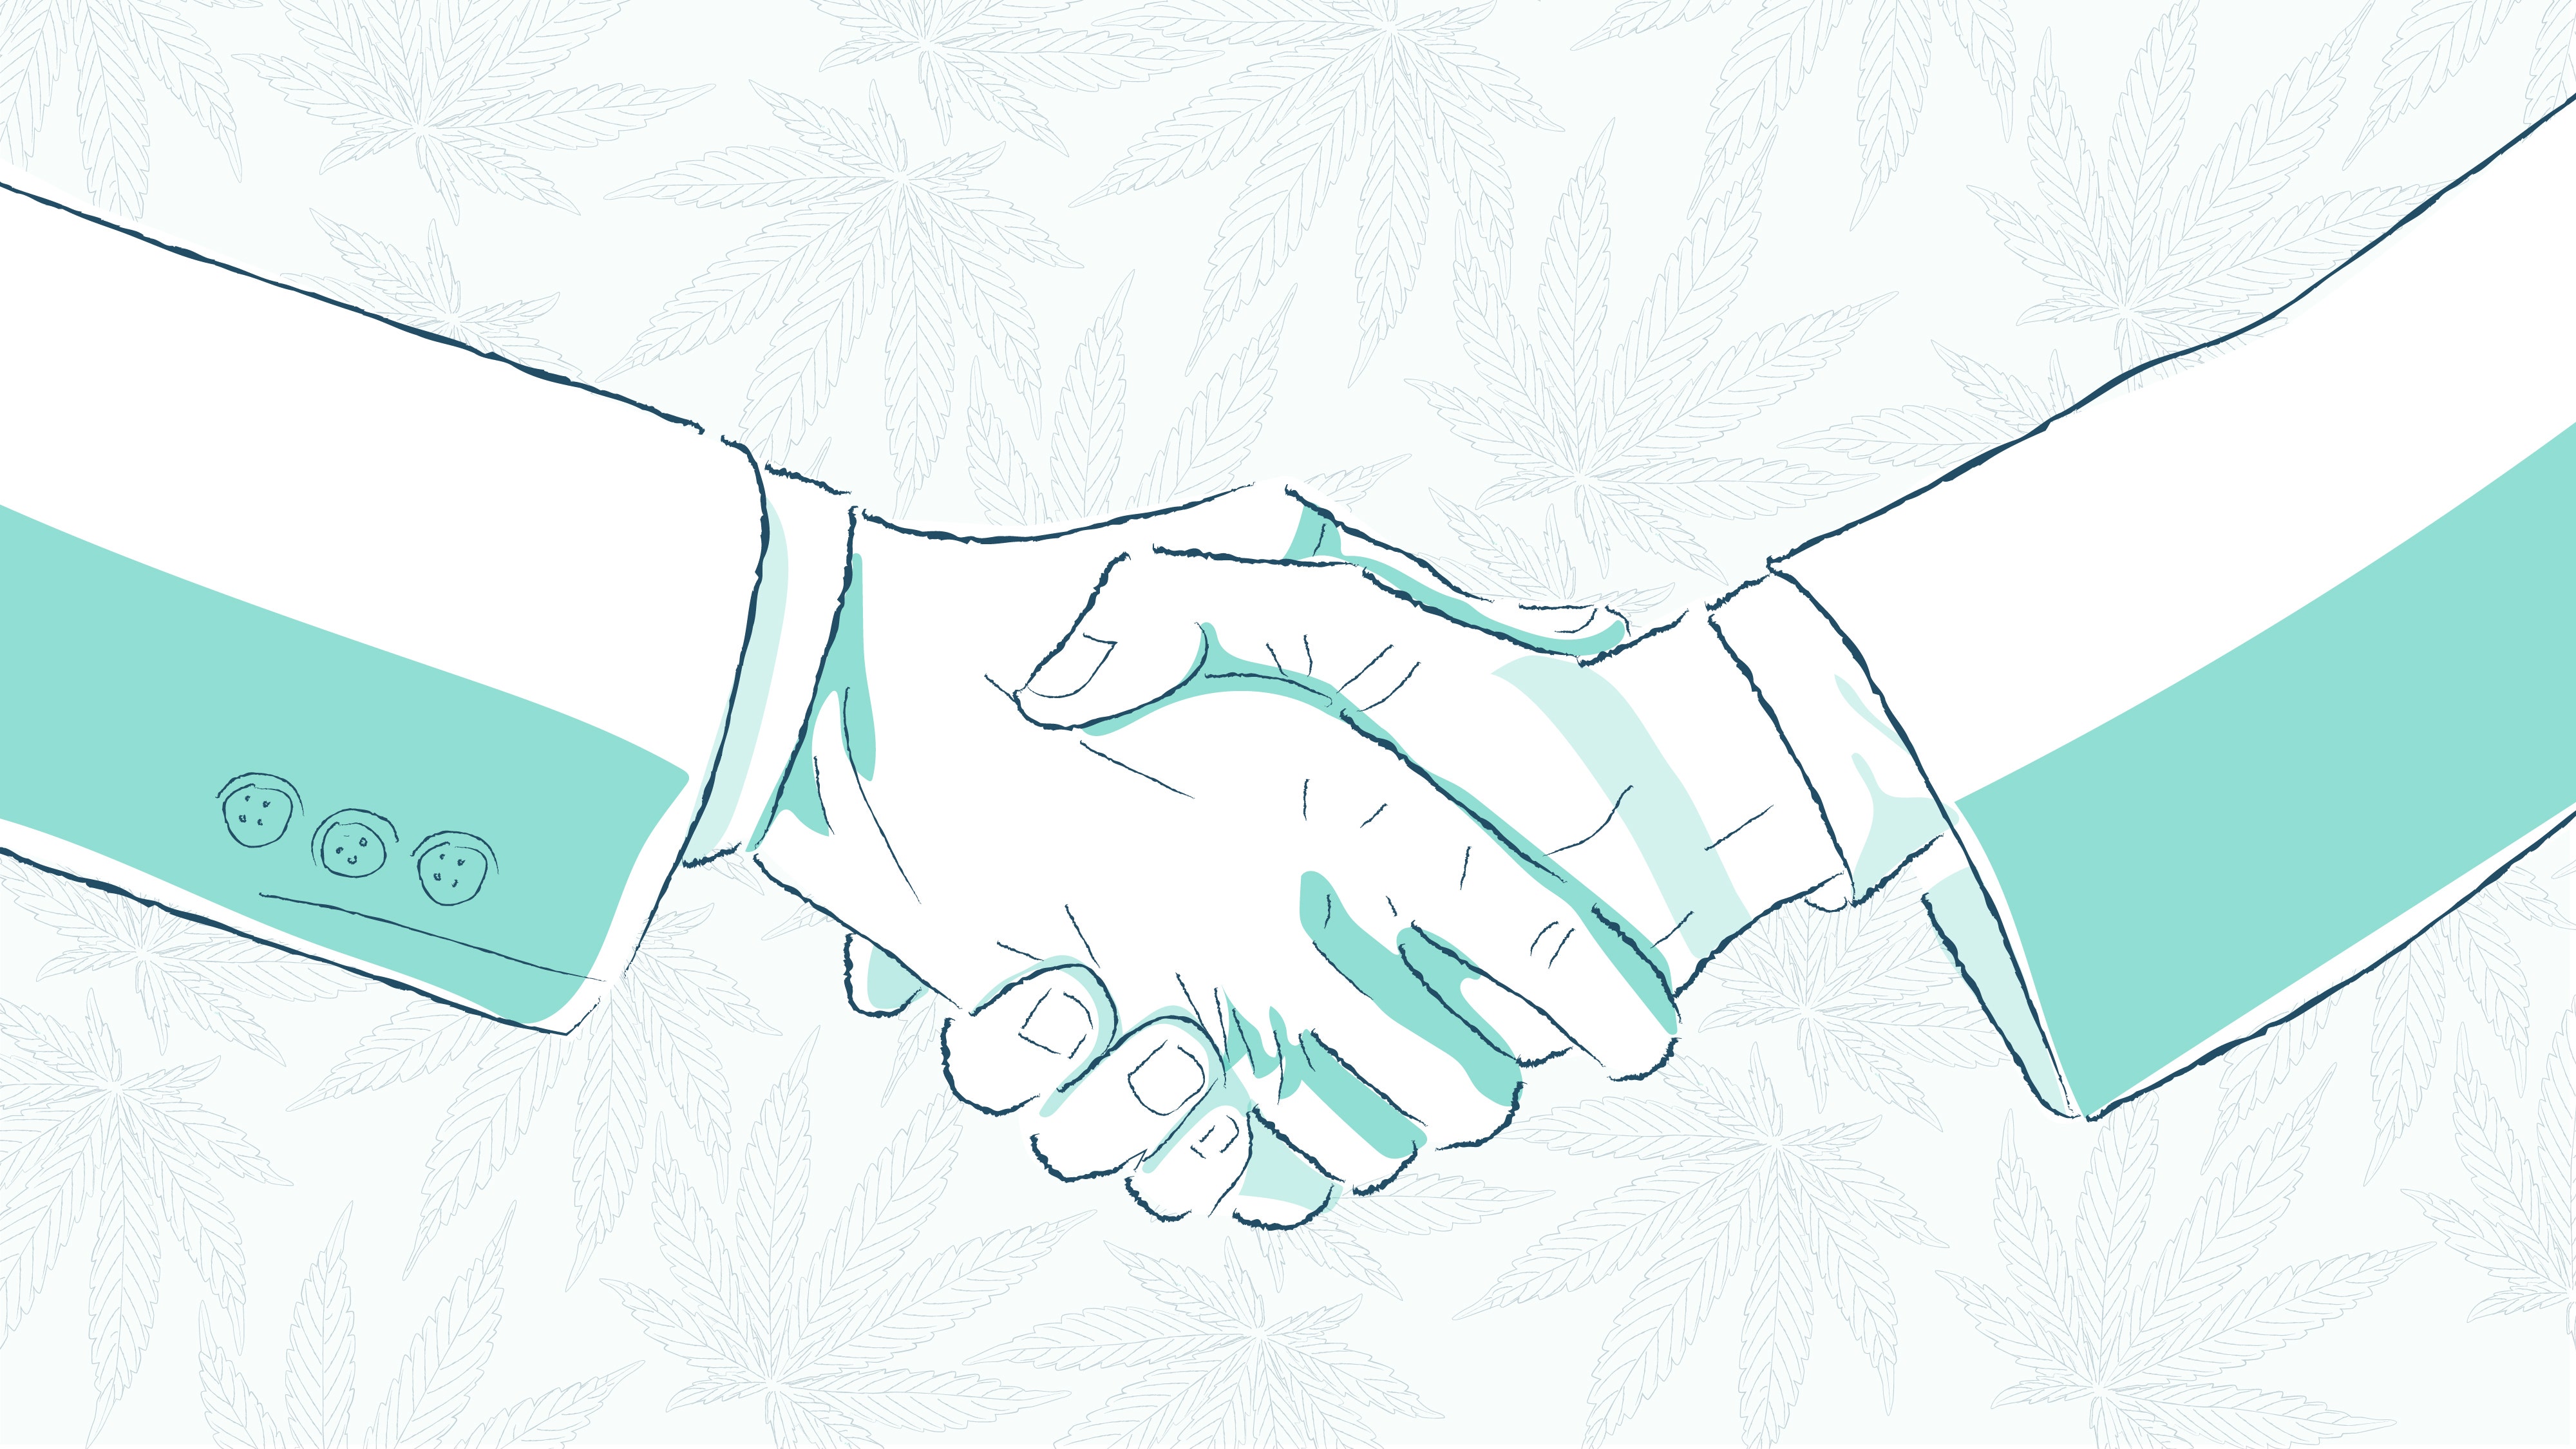 Exclusive: Vangst Launches Executive Talent Service For Cannabis Industry